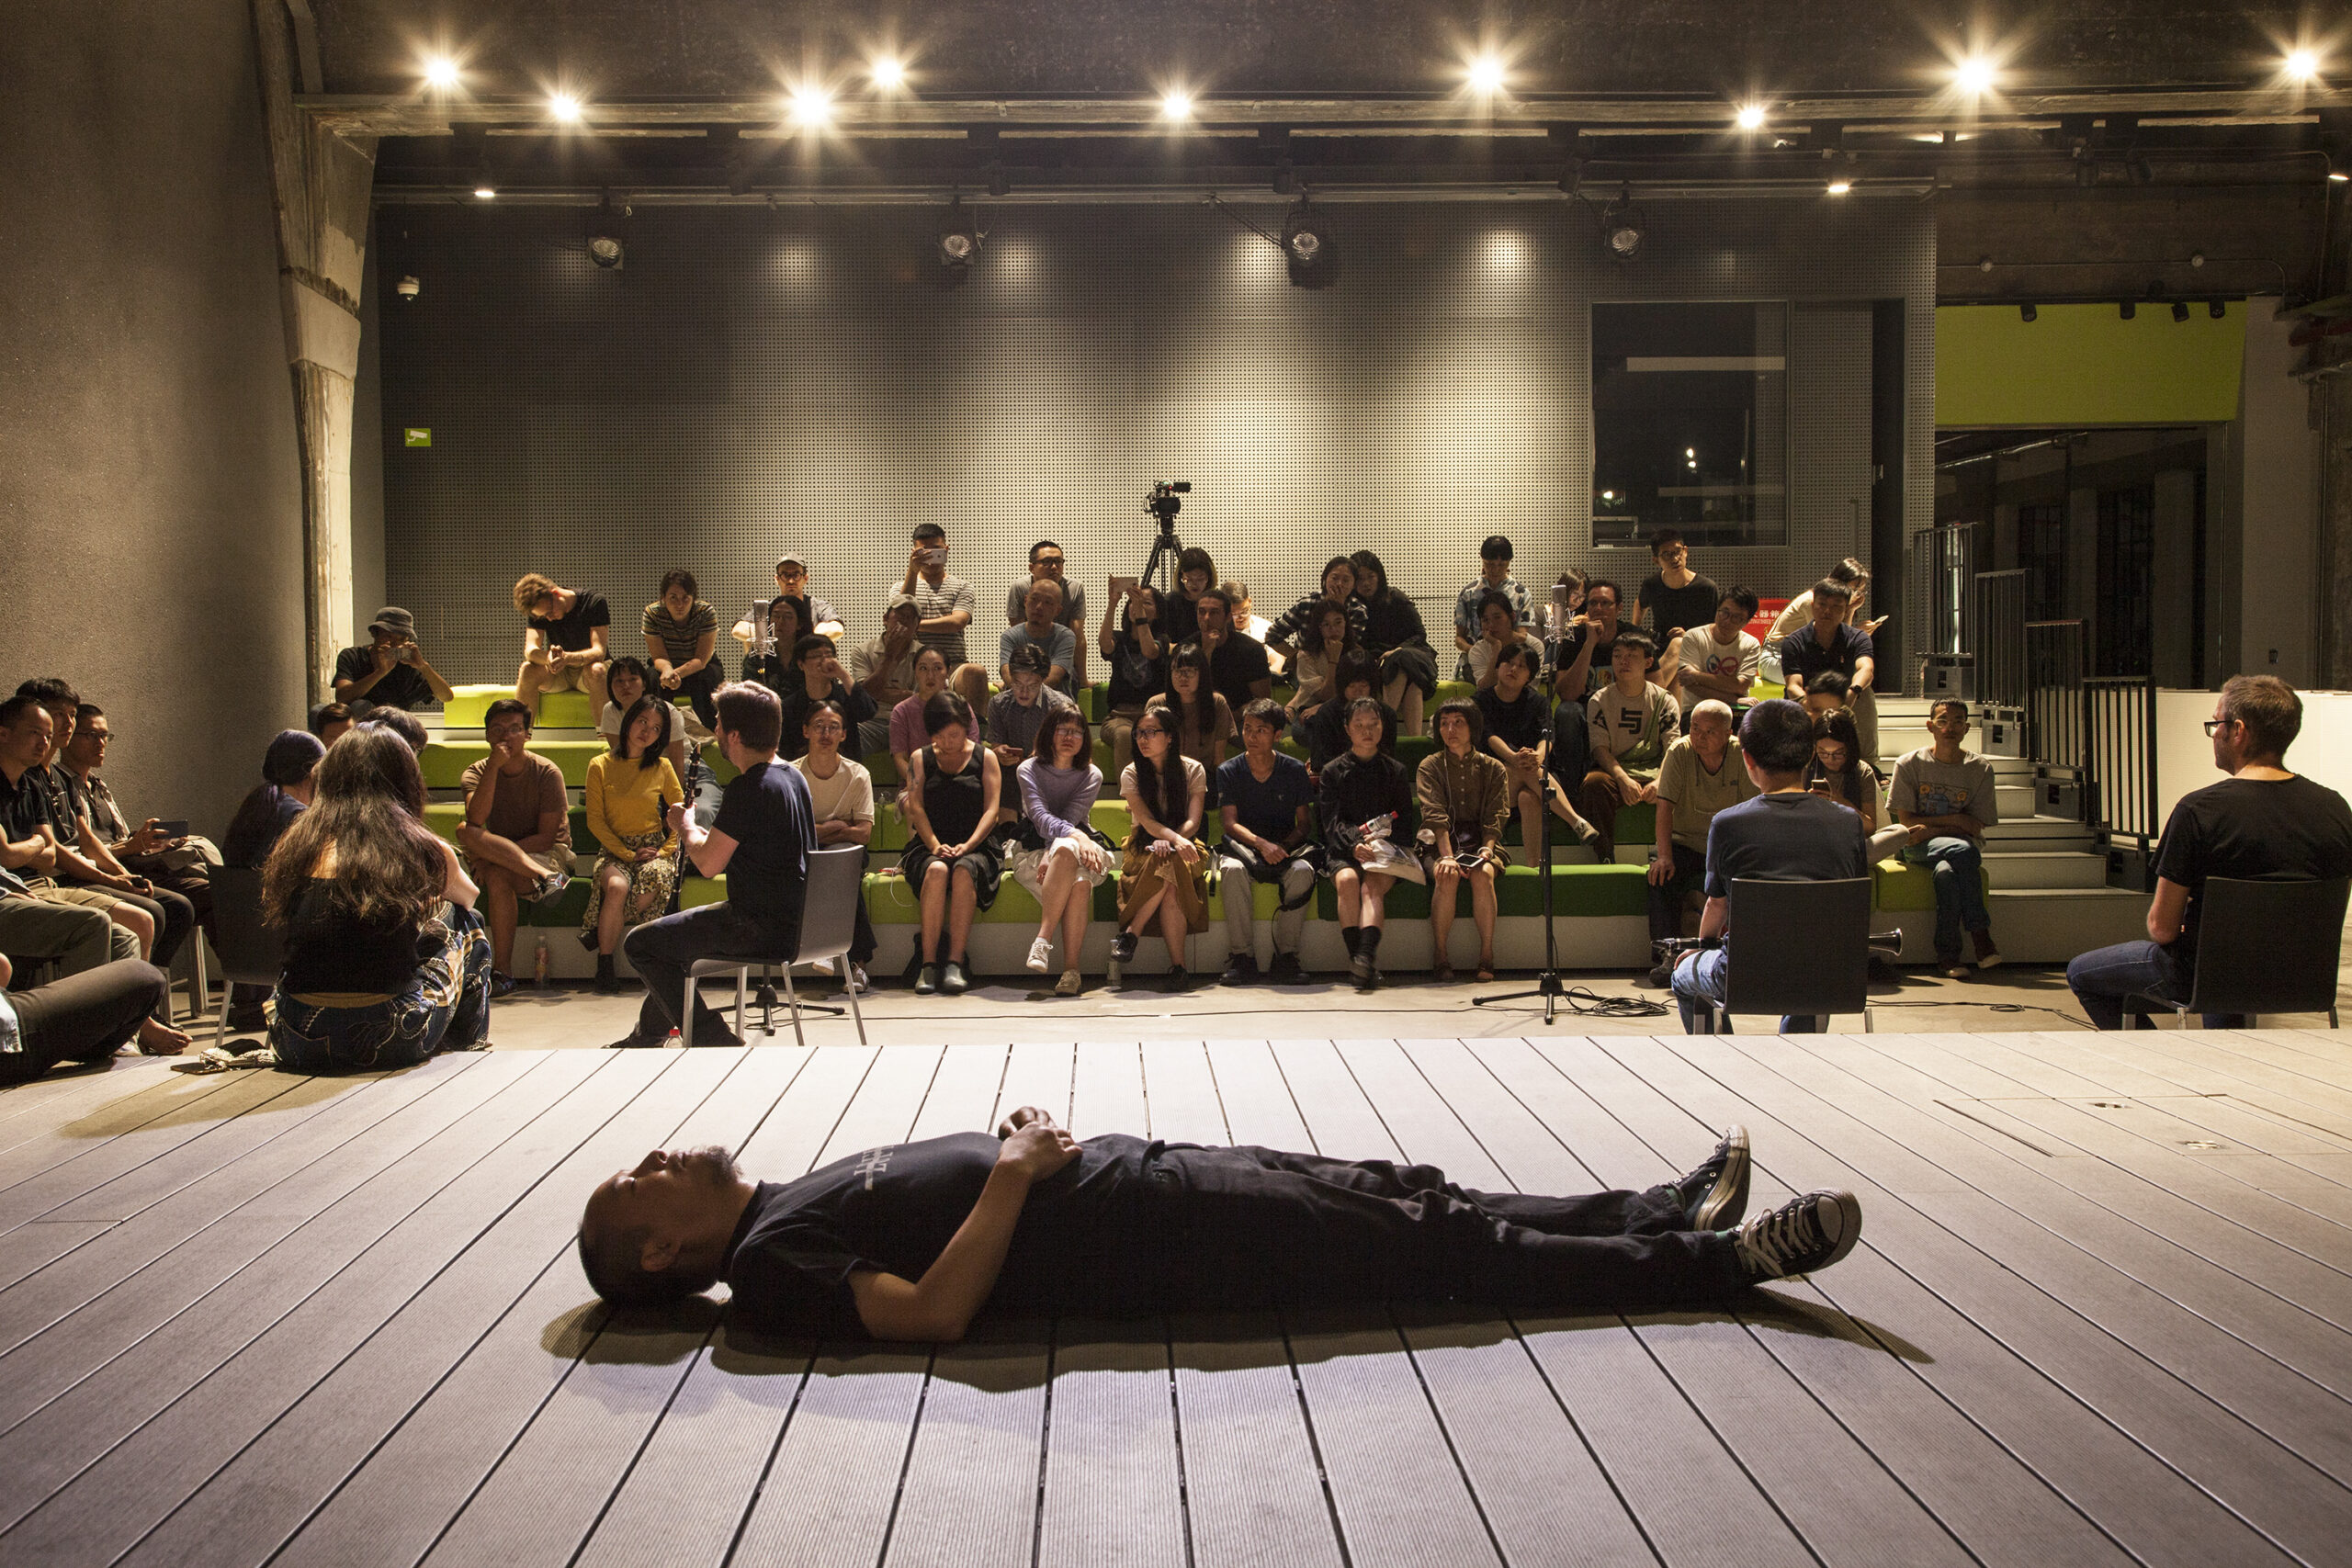 Profile image of Yan Jun lying on a stage in front of an audience